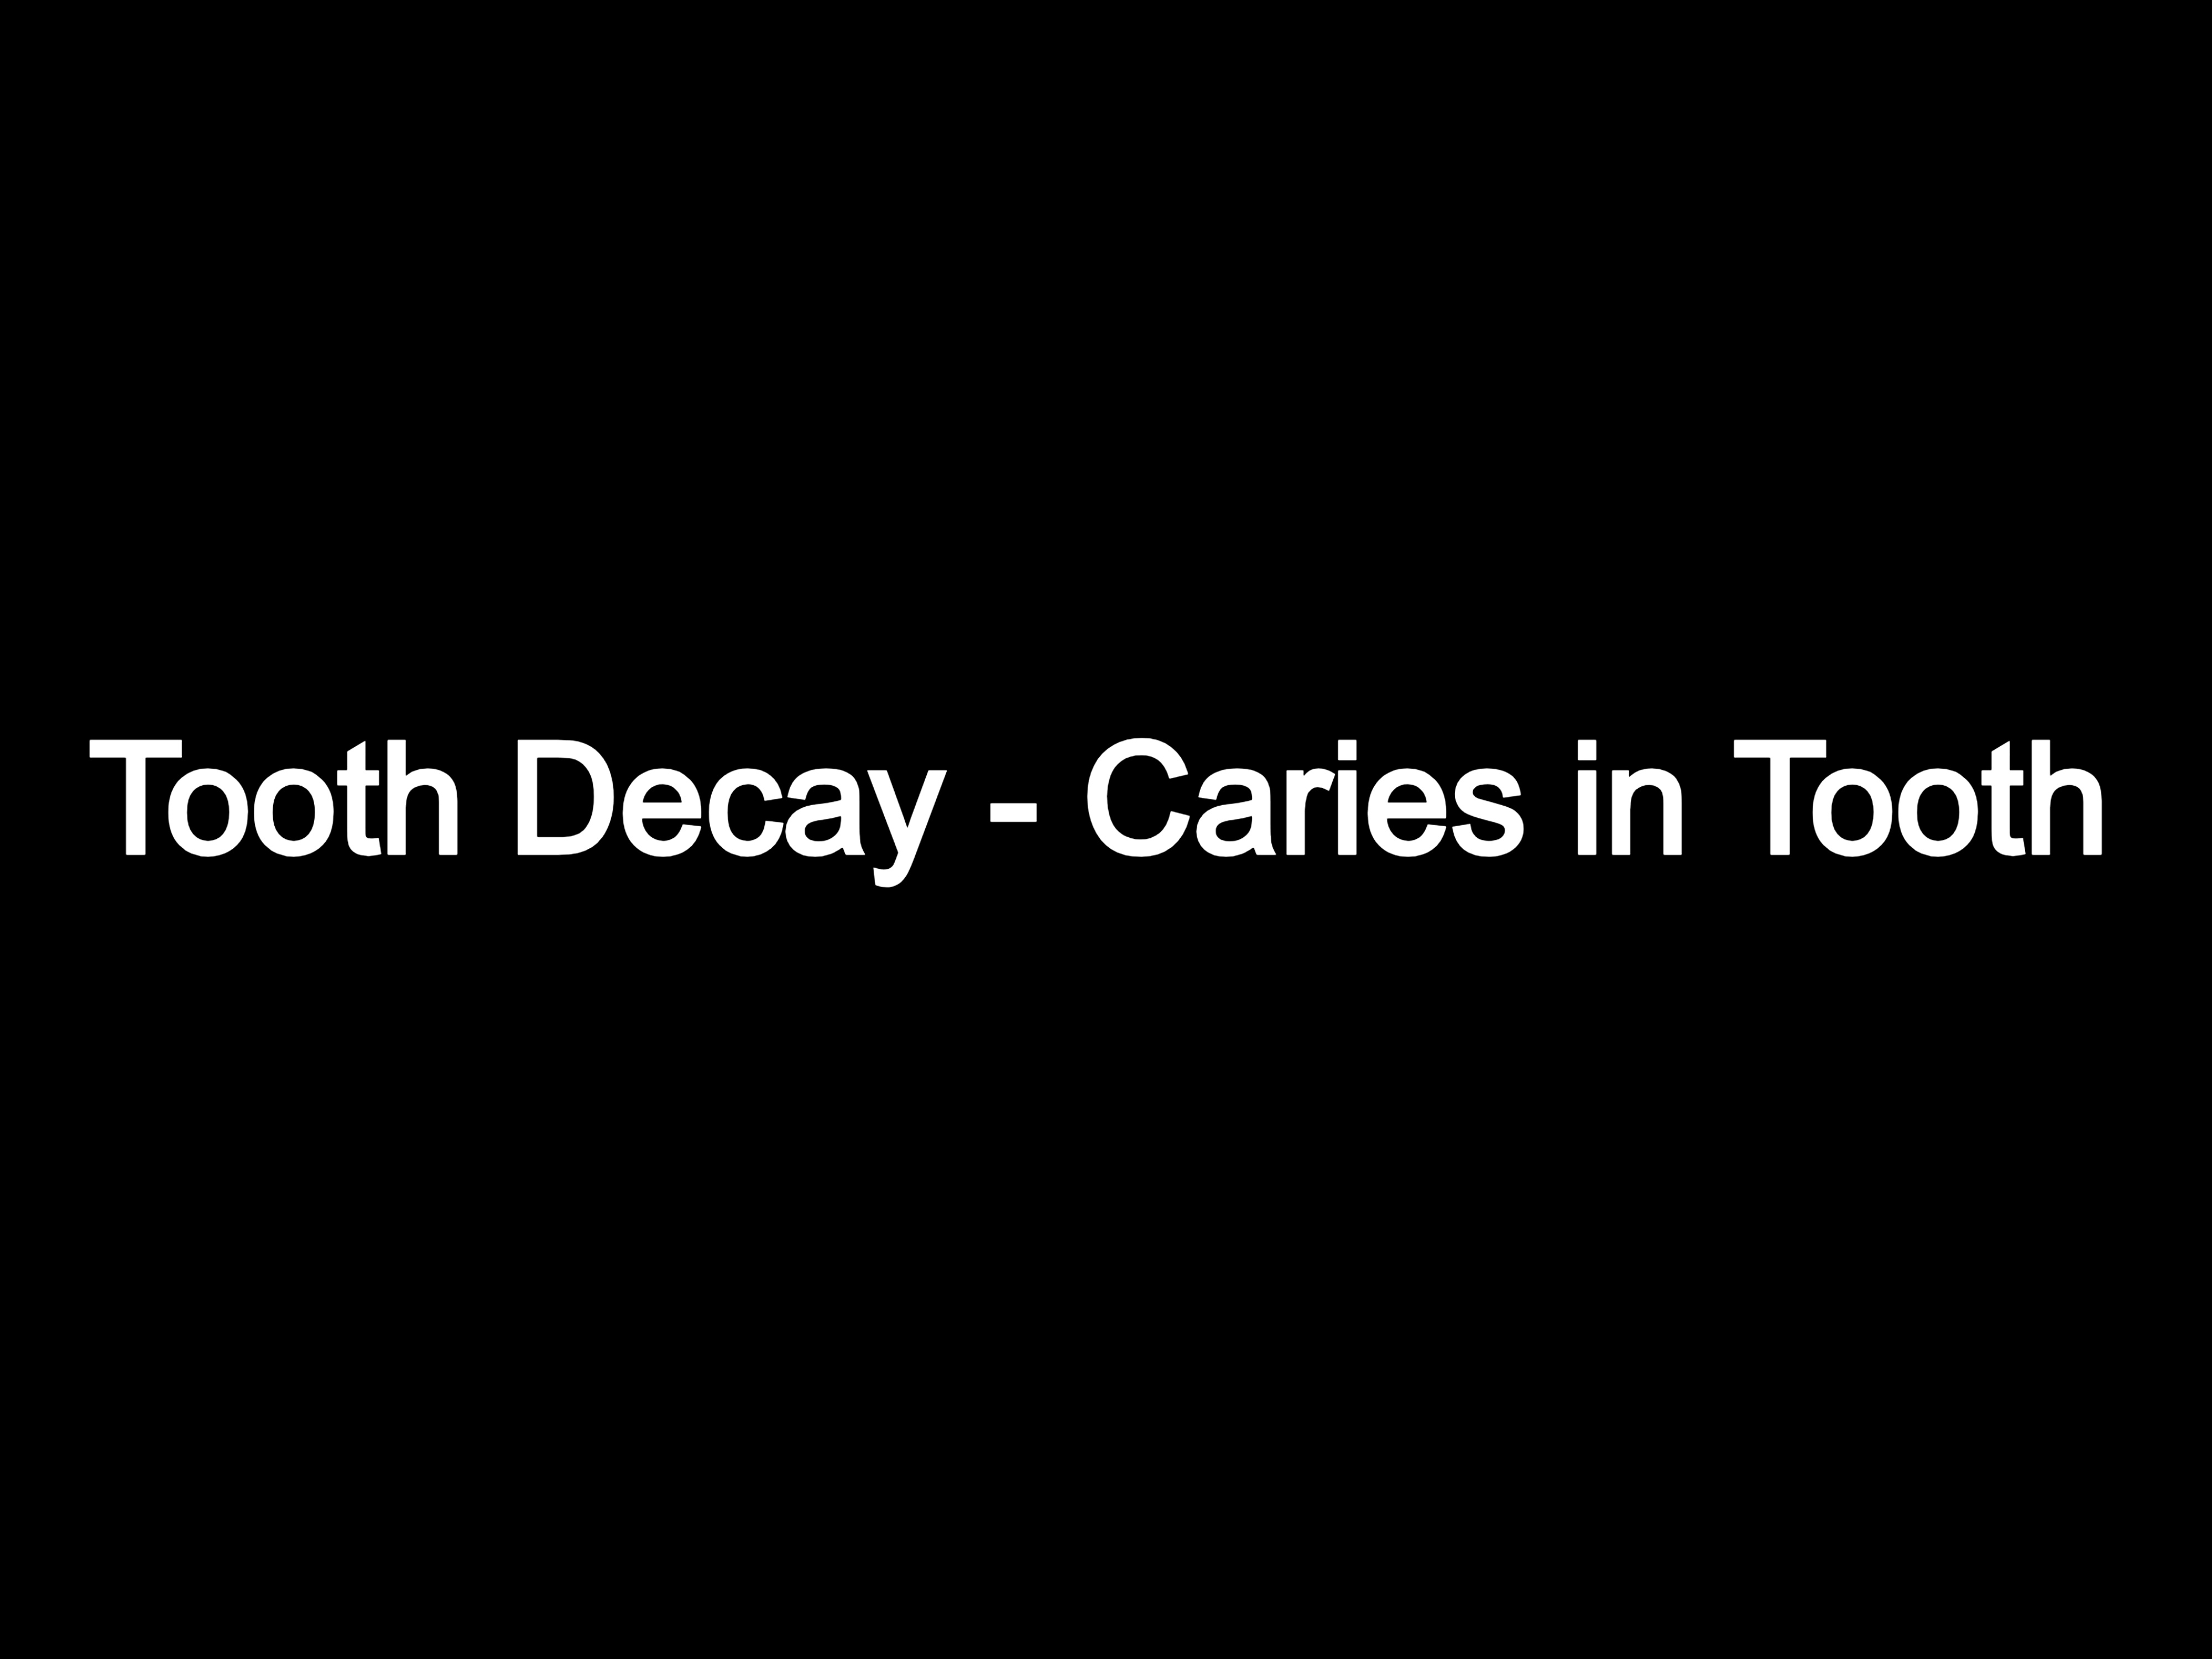 Tooth Decay - Caries in tooth